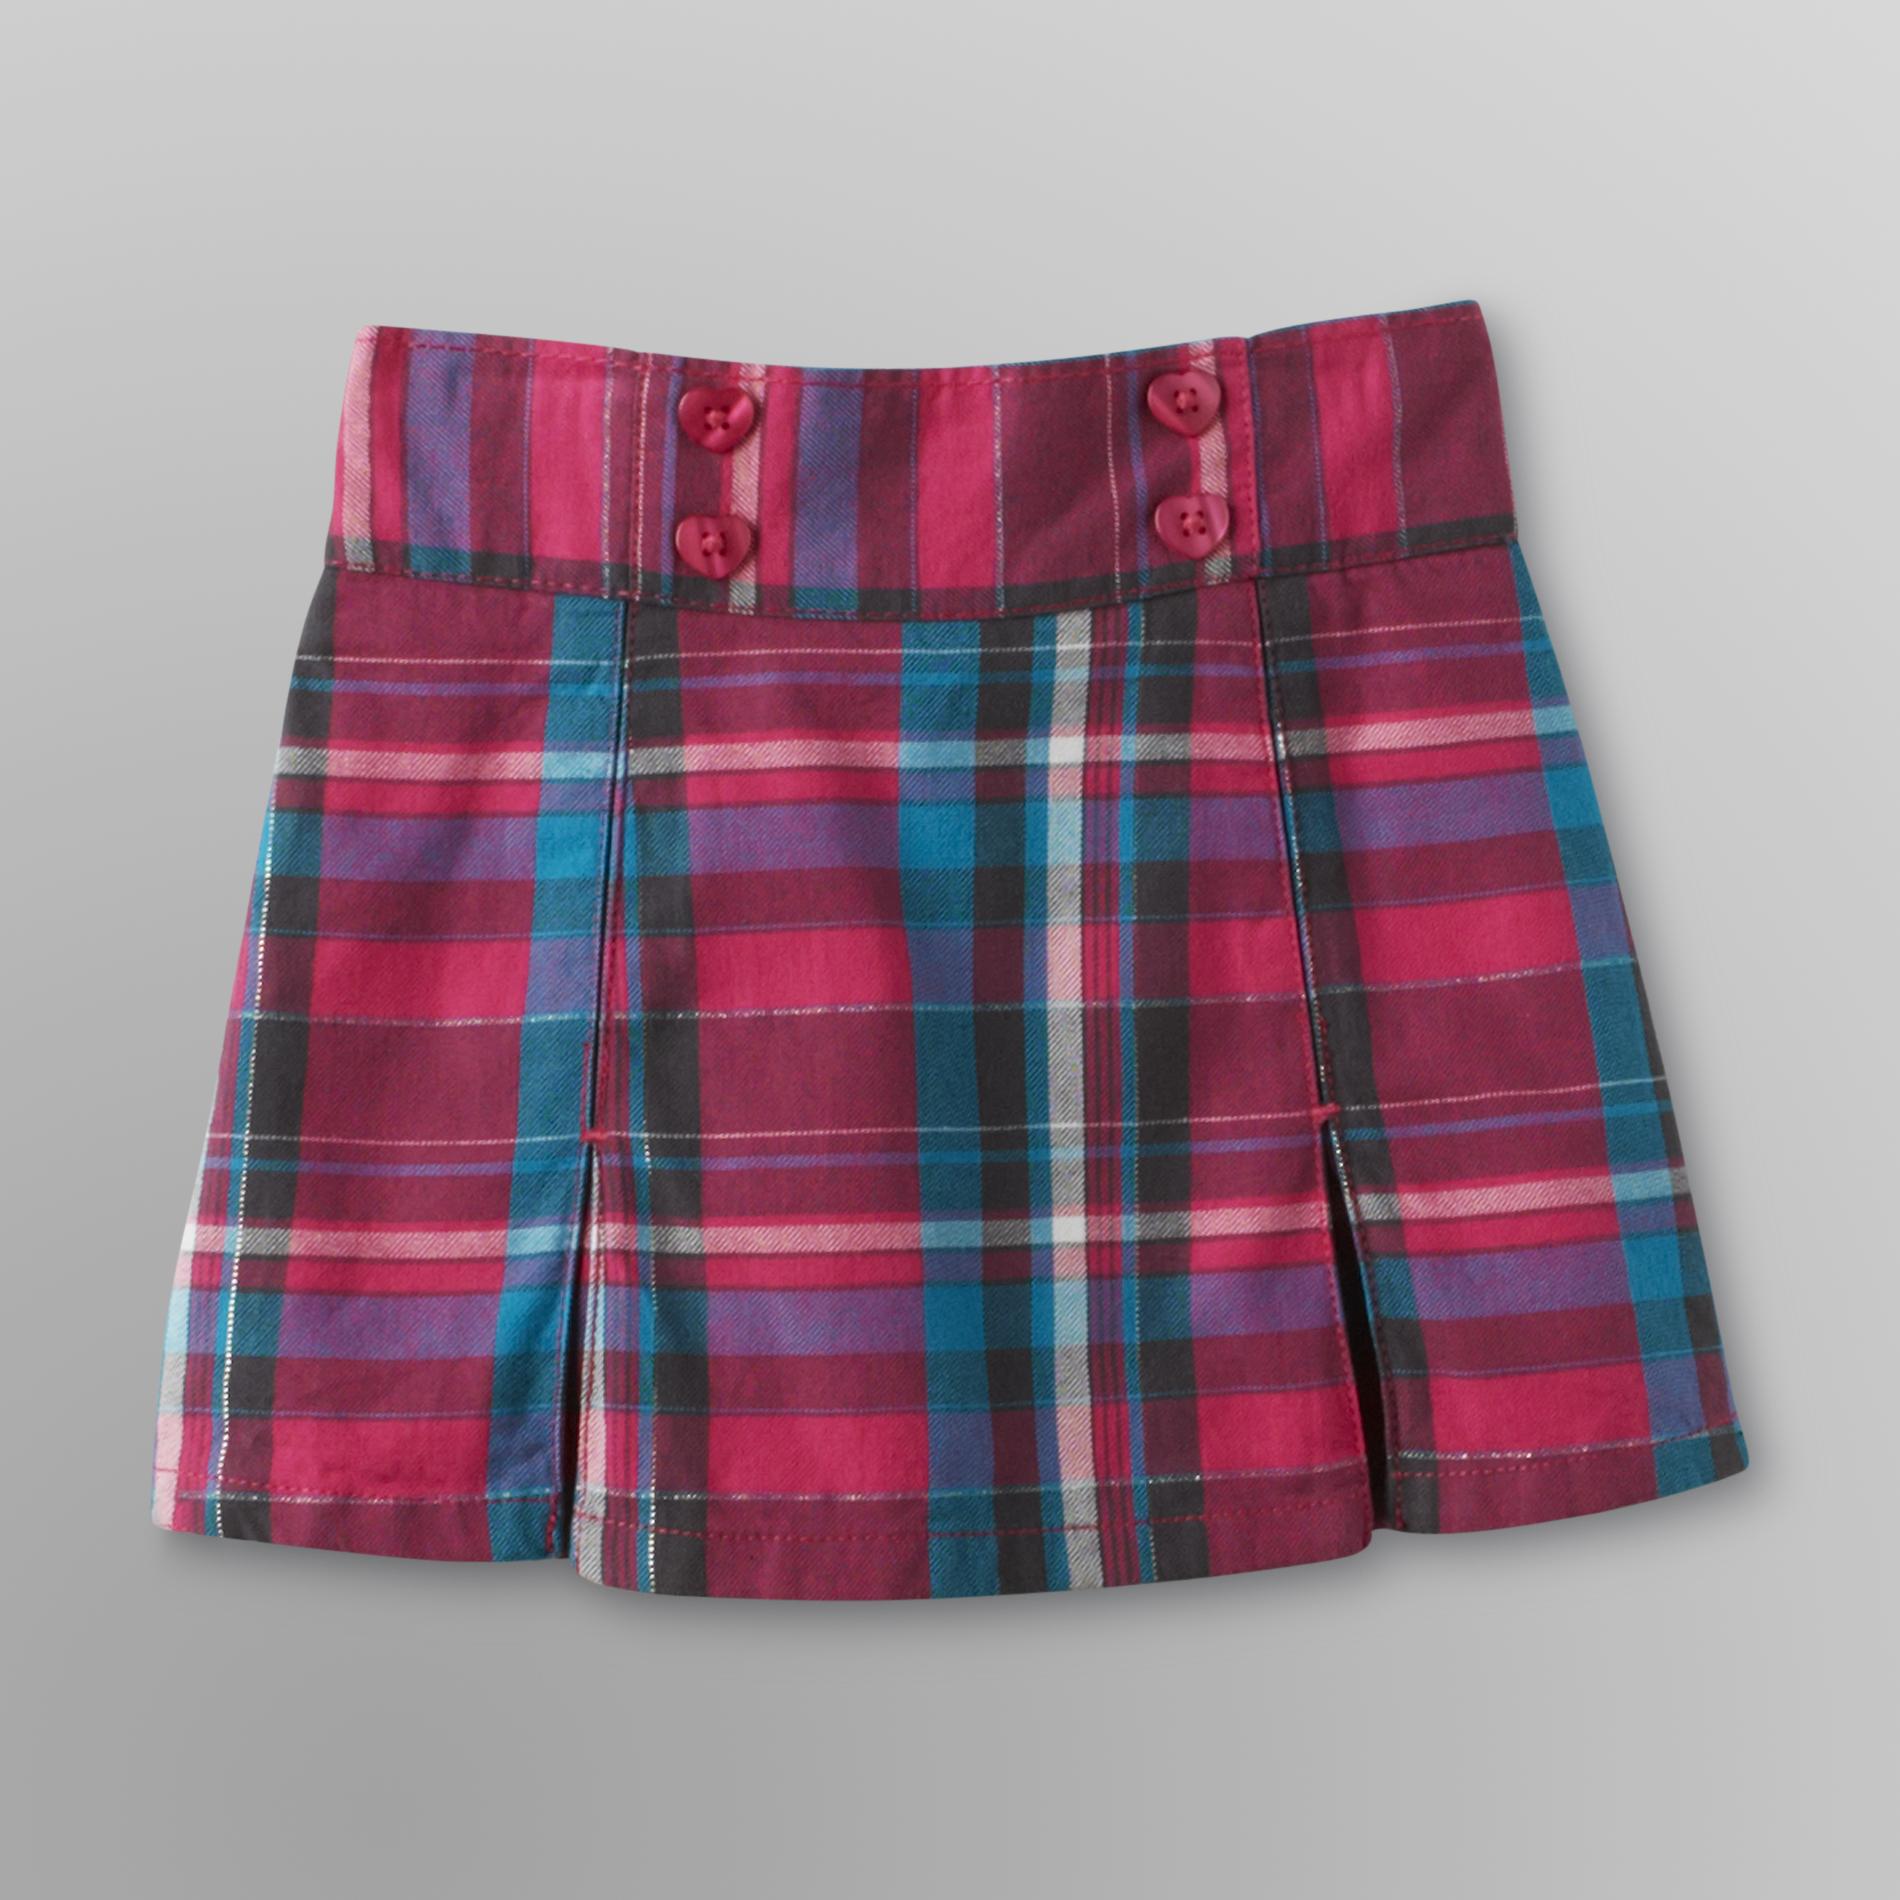 Toughskins Girl's Pleated Scooter Skirt - Plaid